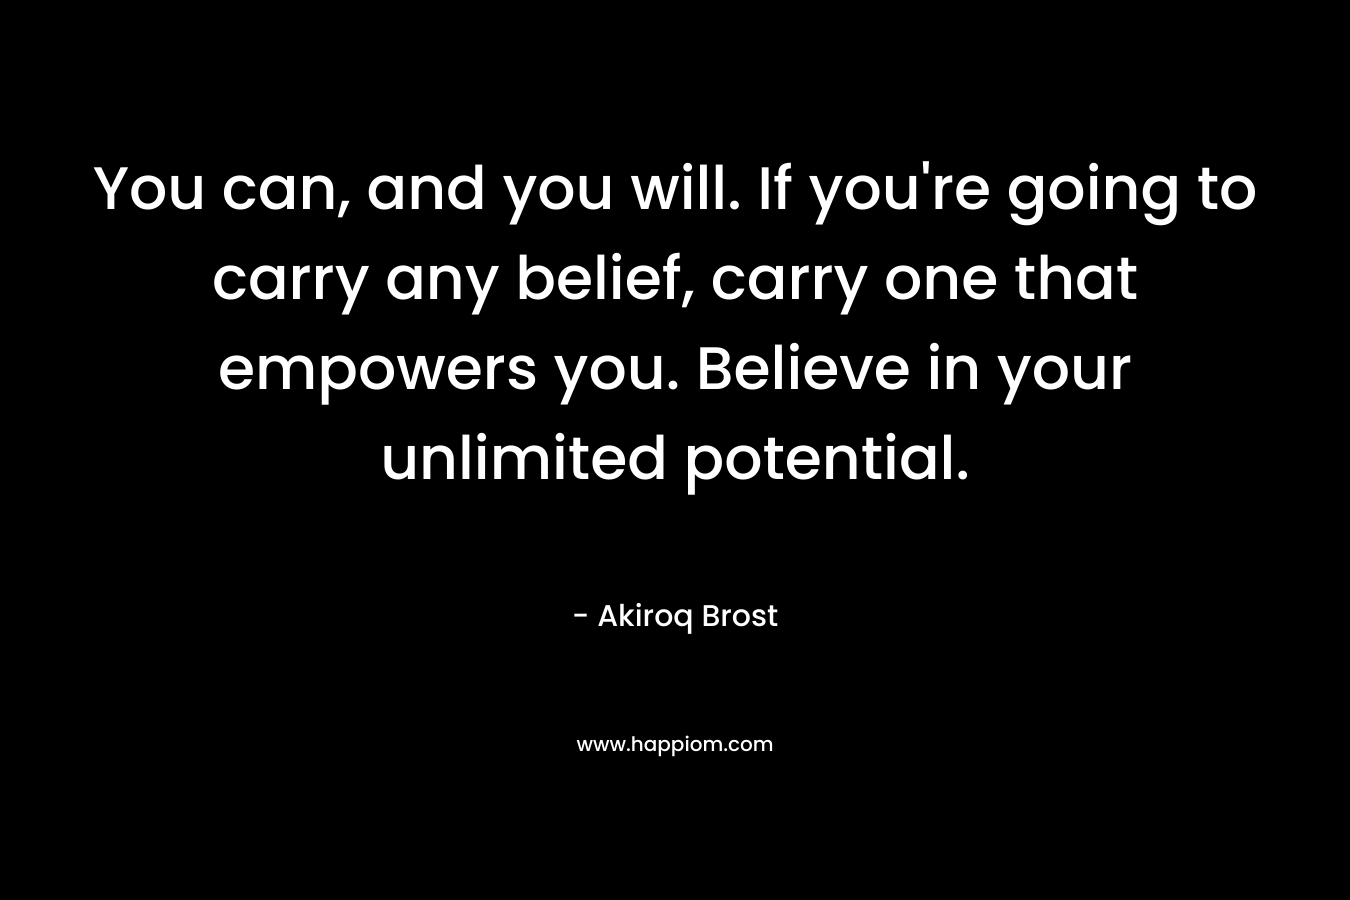 You can, and you will. If you're going to carry any belief, carry one that empowers you. Believe in your unlimited potential.